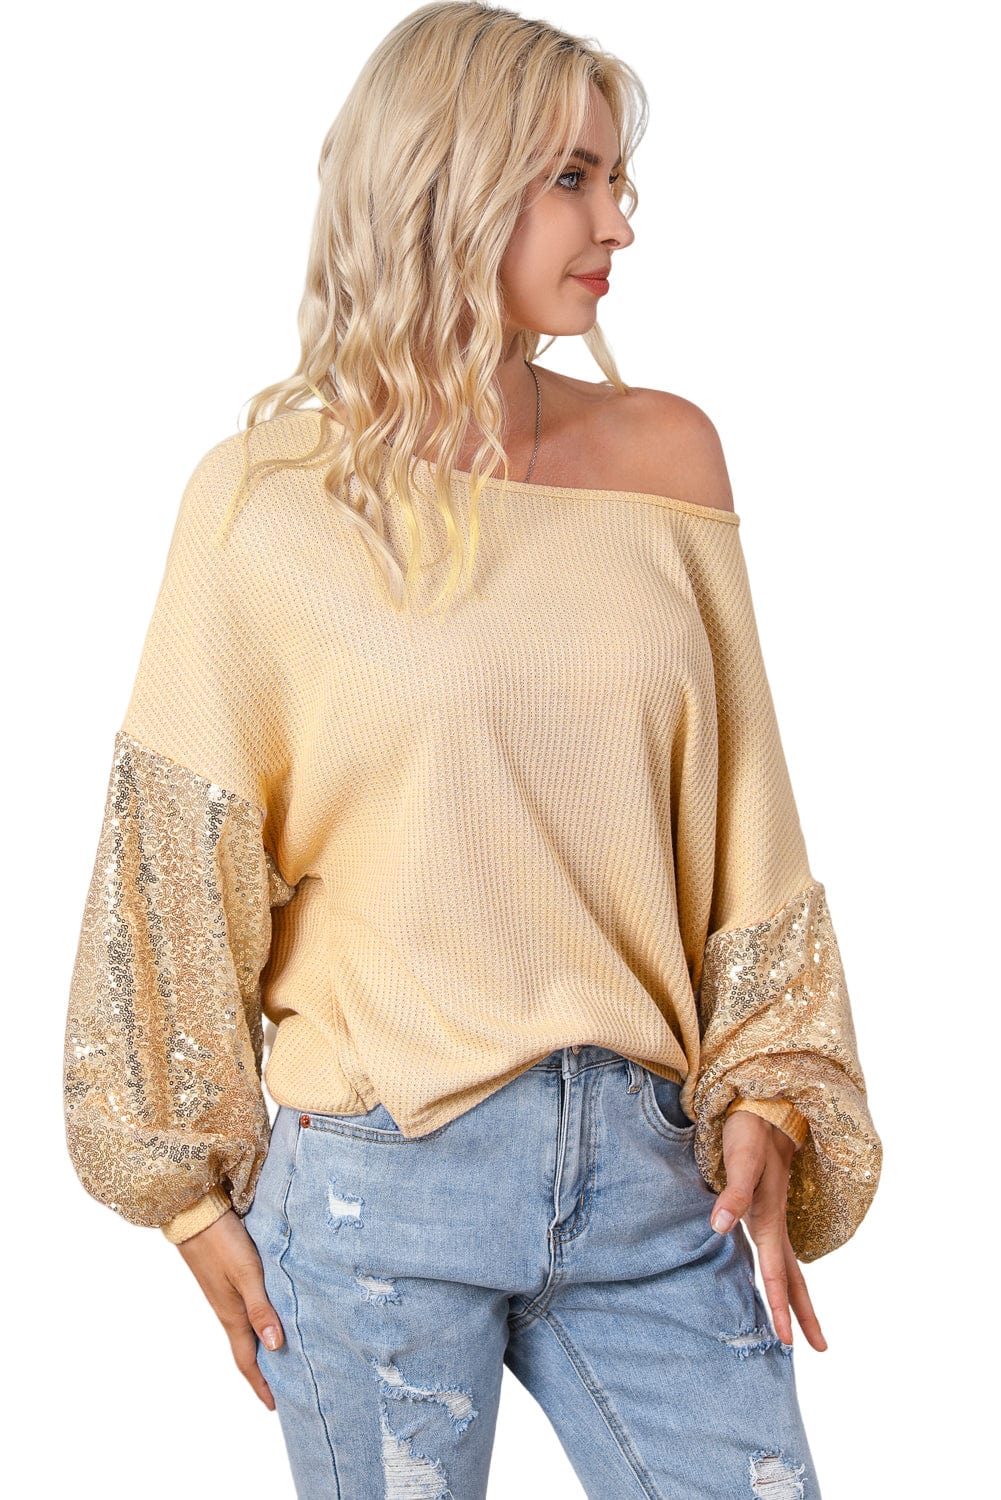 The802Gypsy  Tops Traveling Gypsy Hammer Open Back Waffle Knit Top